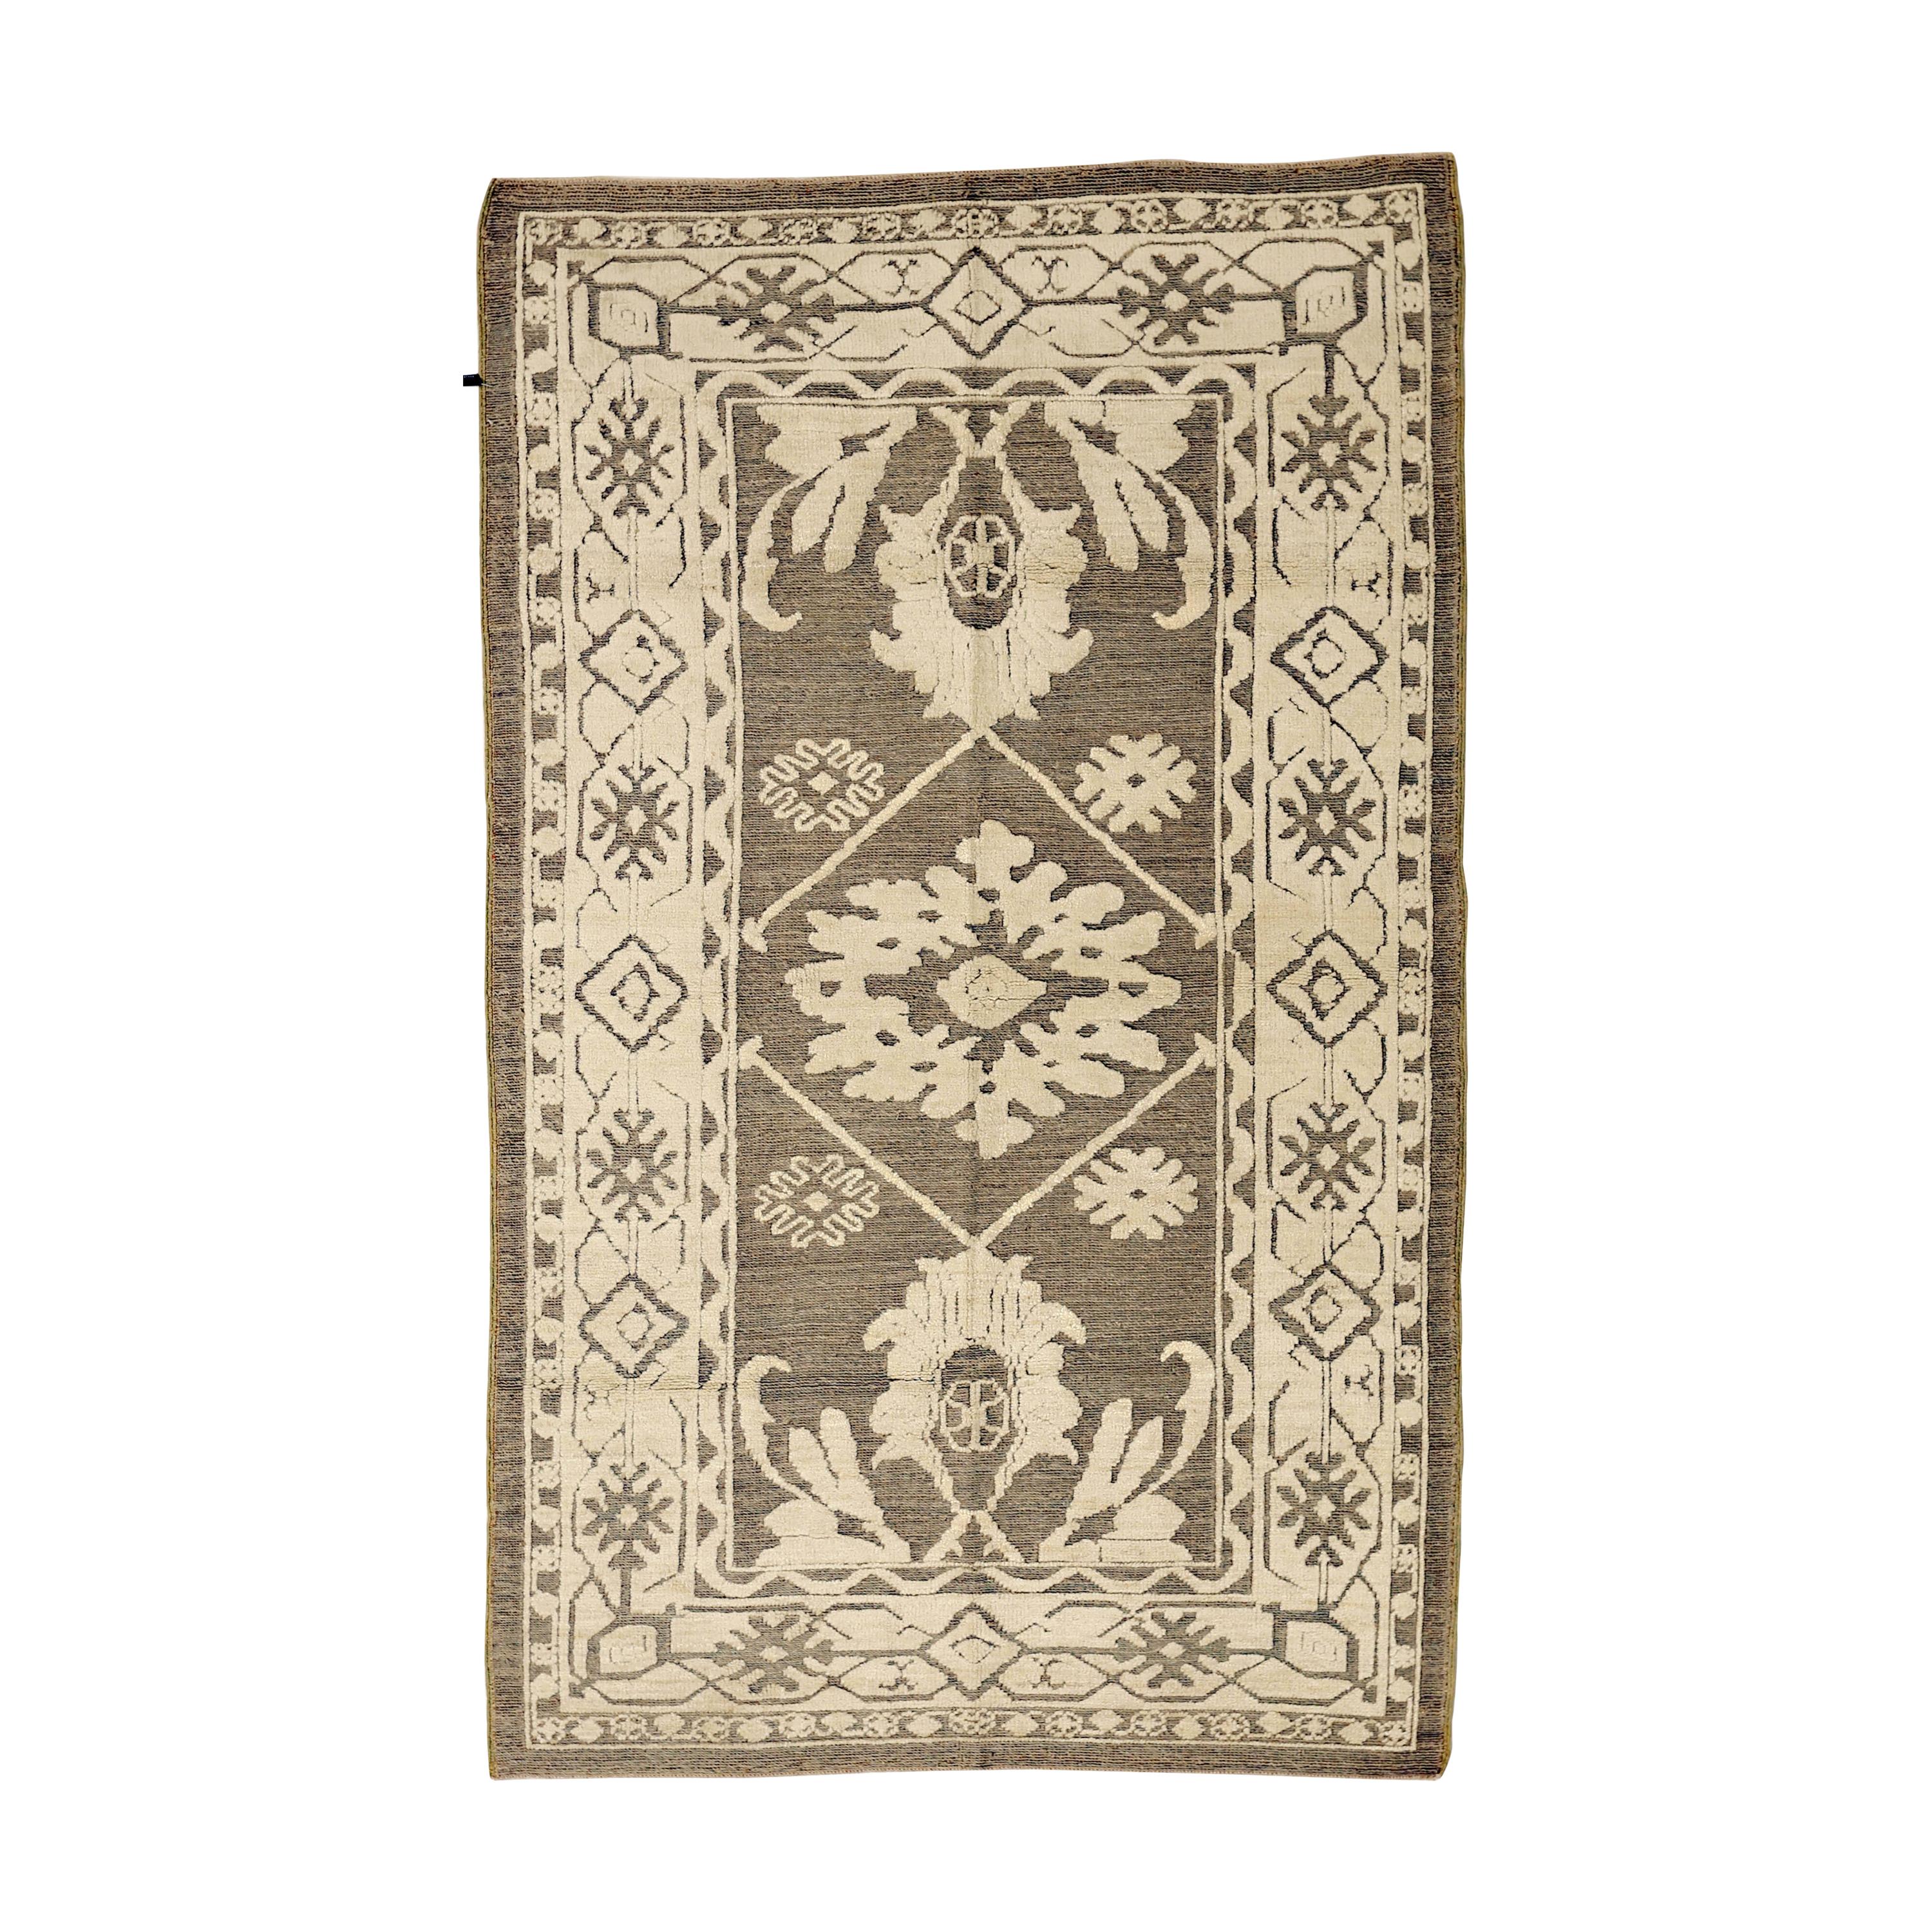 New Turkish Oushak Rug with Ivory Botanical Details on Beige Field For Sale